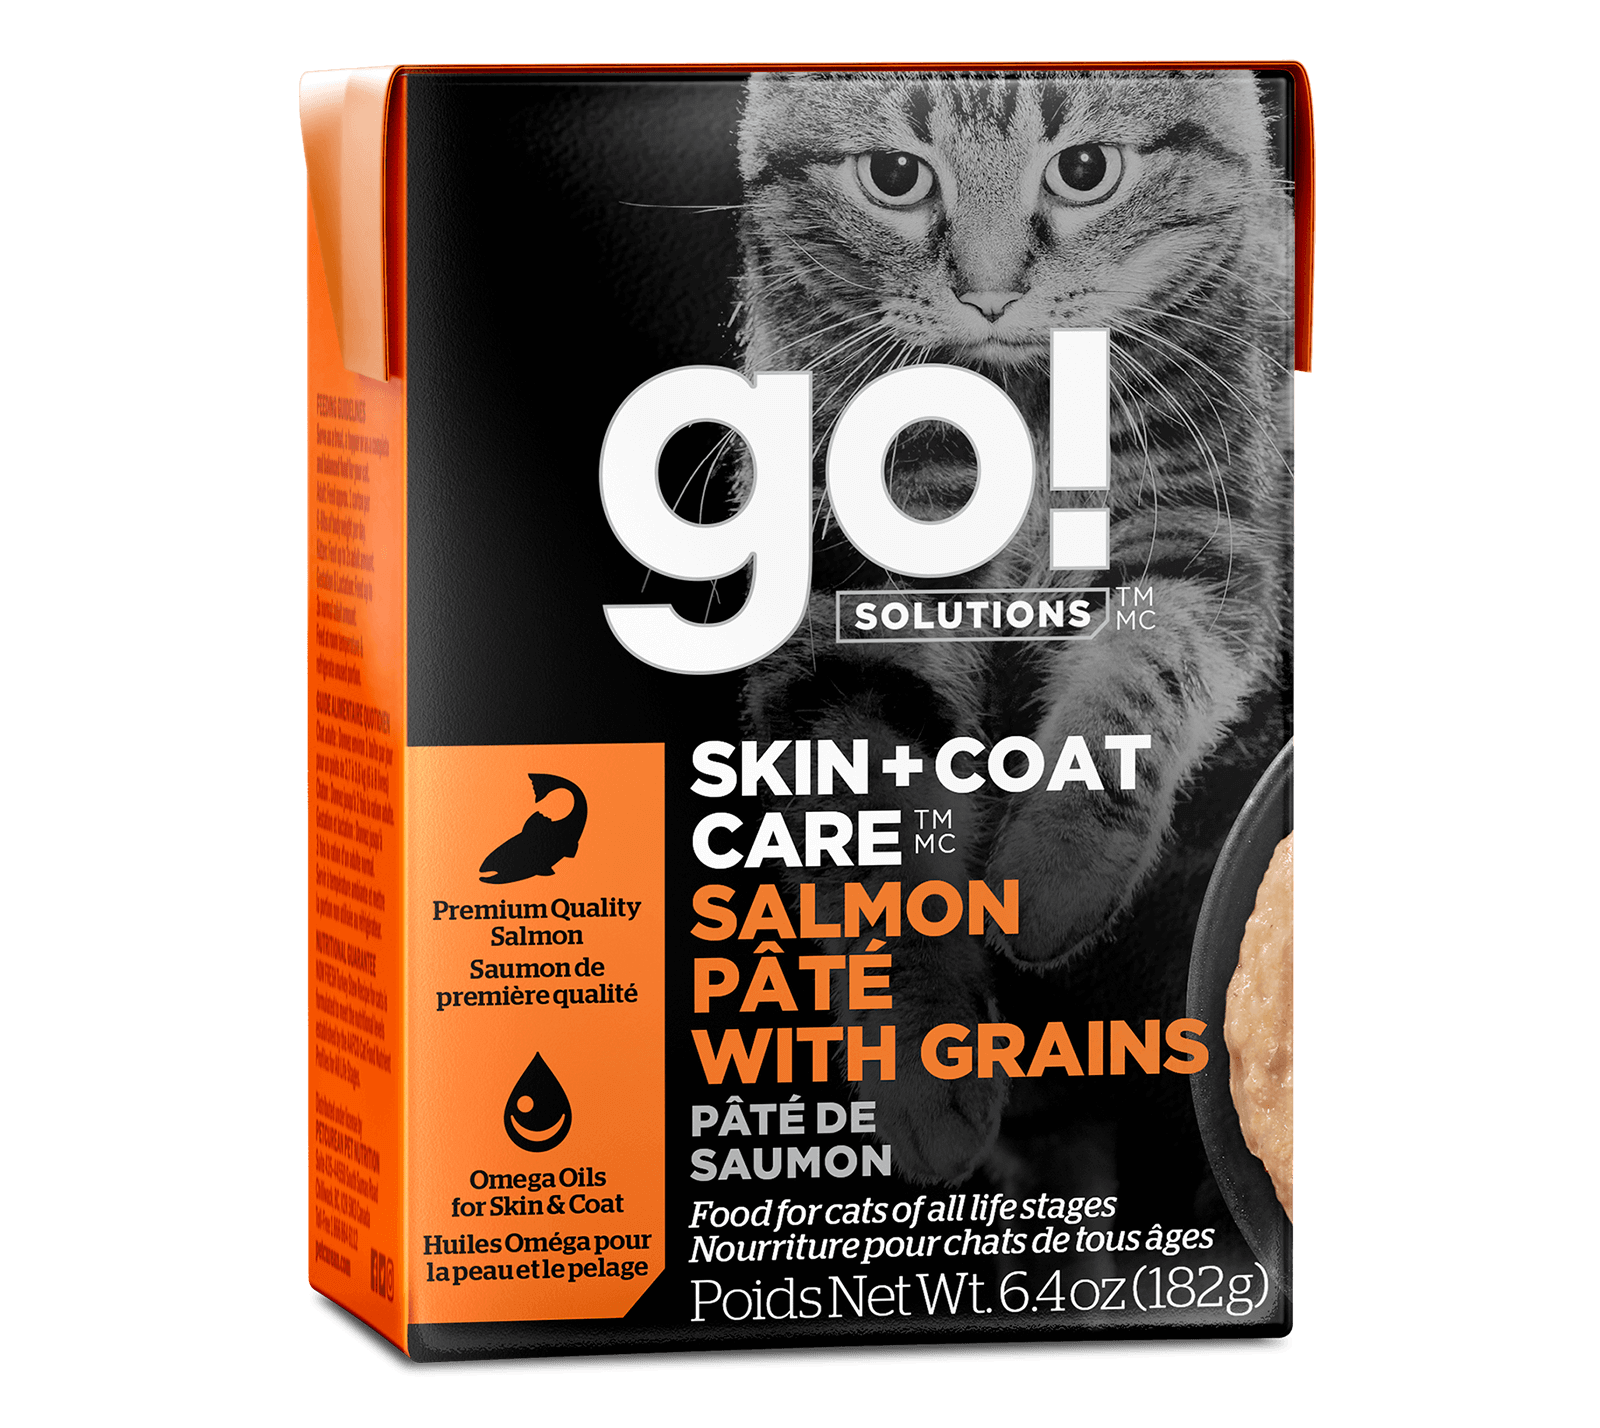 Go! Solutions Skin + Coat Care Minced Chicken Recipe with Grains for Cats